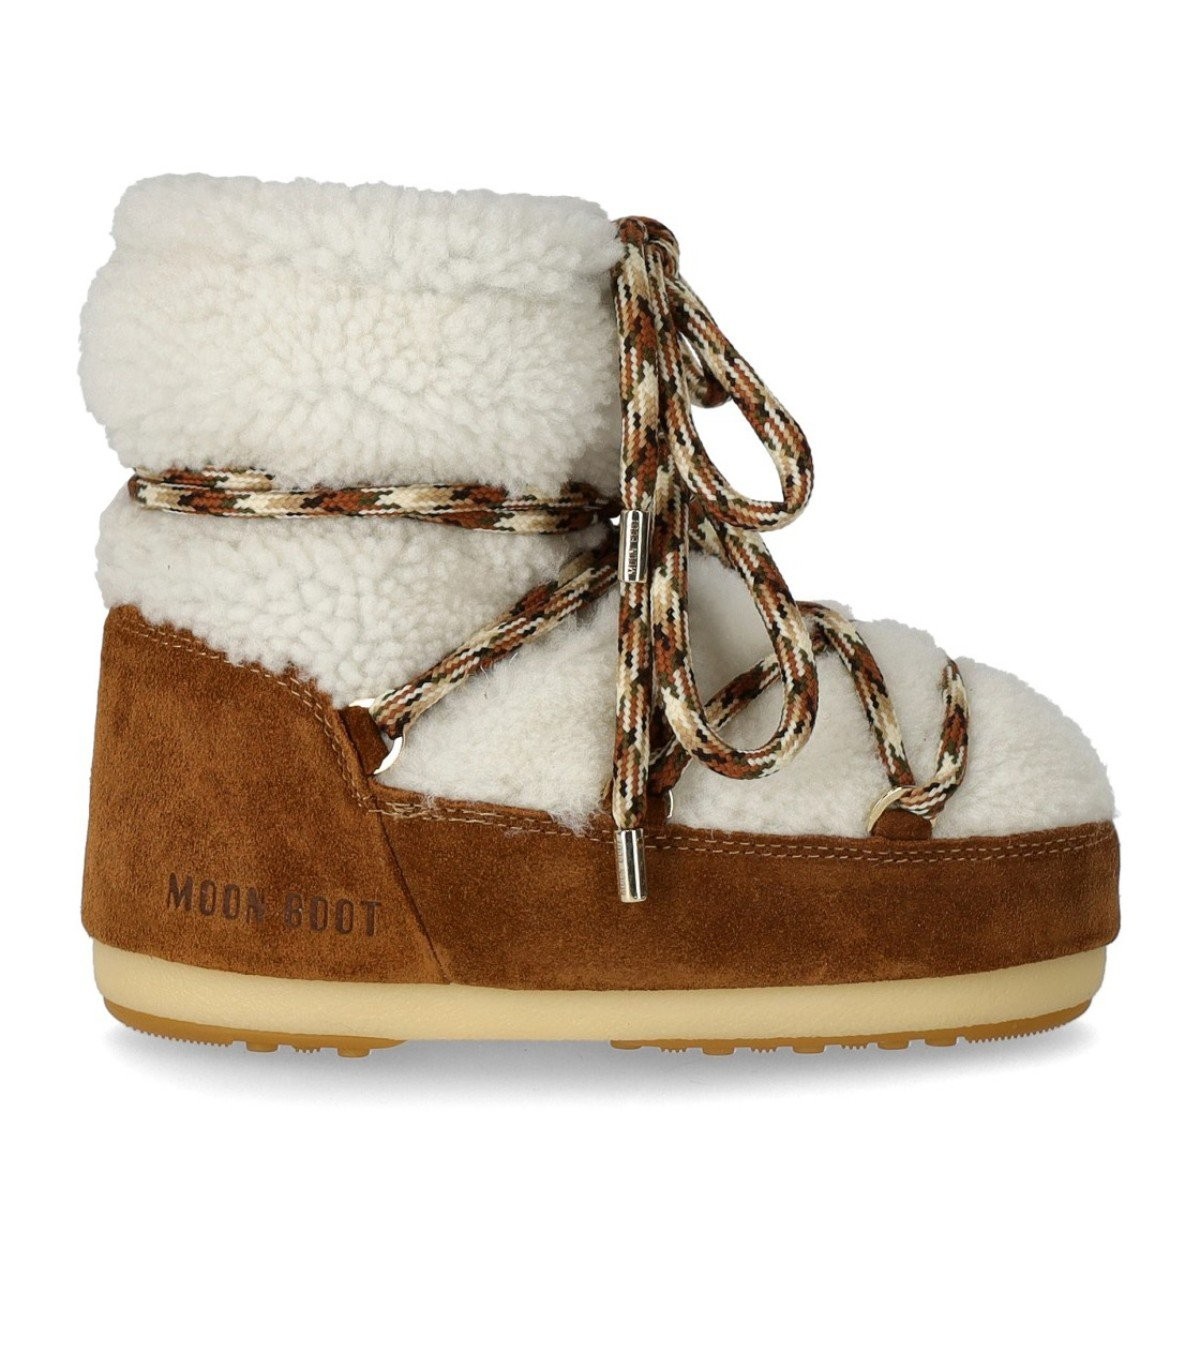 MOON BOOT LIGHT LOW SHEARLING WHISKY SNOW BOOT